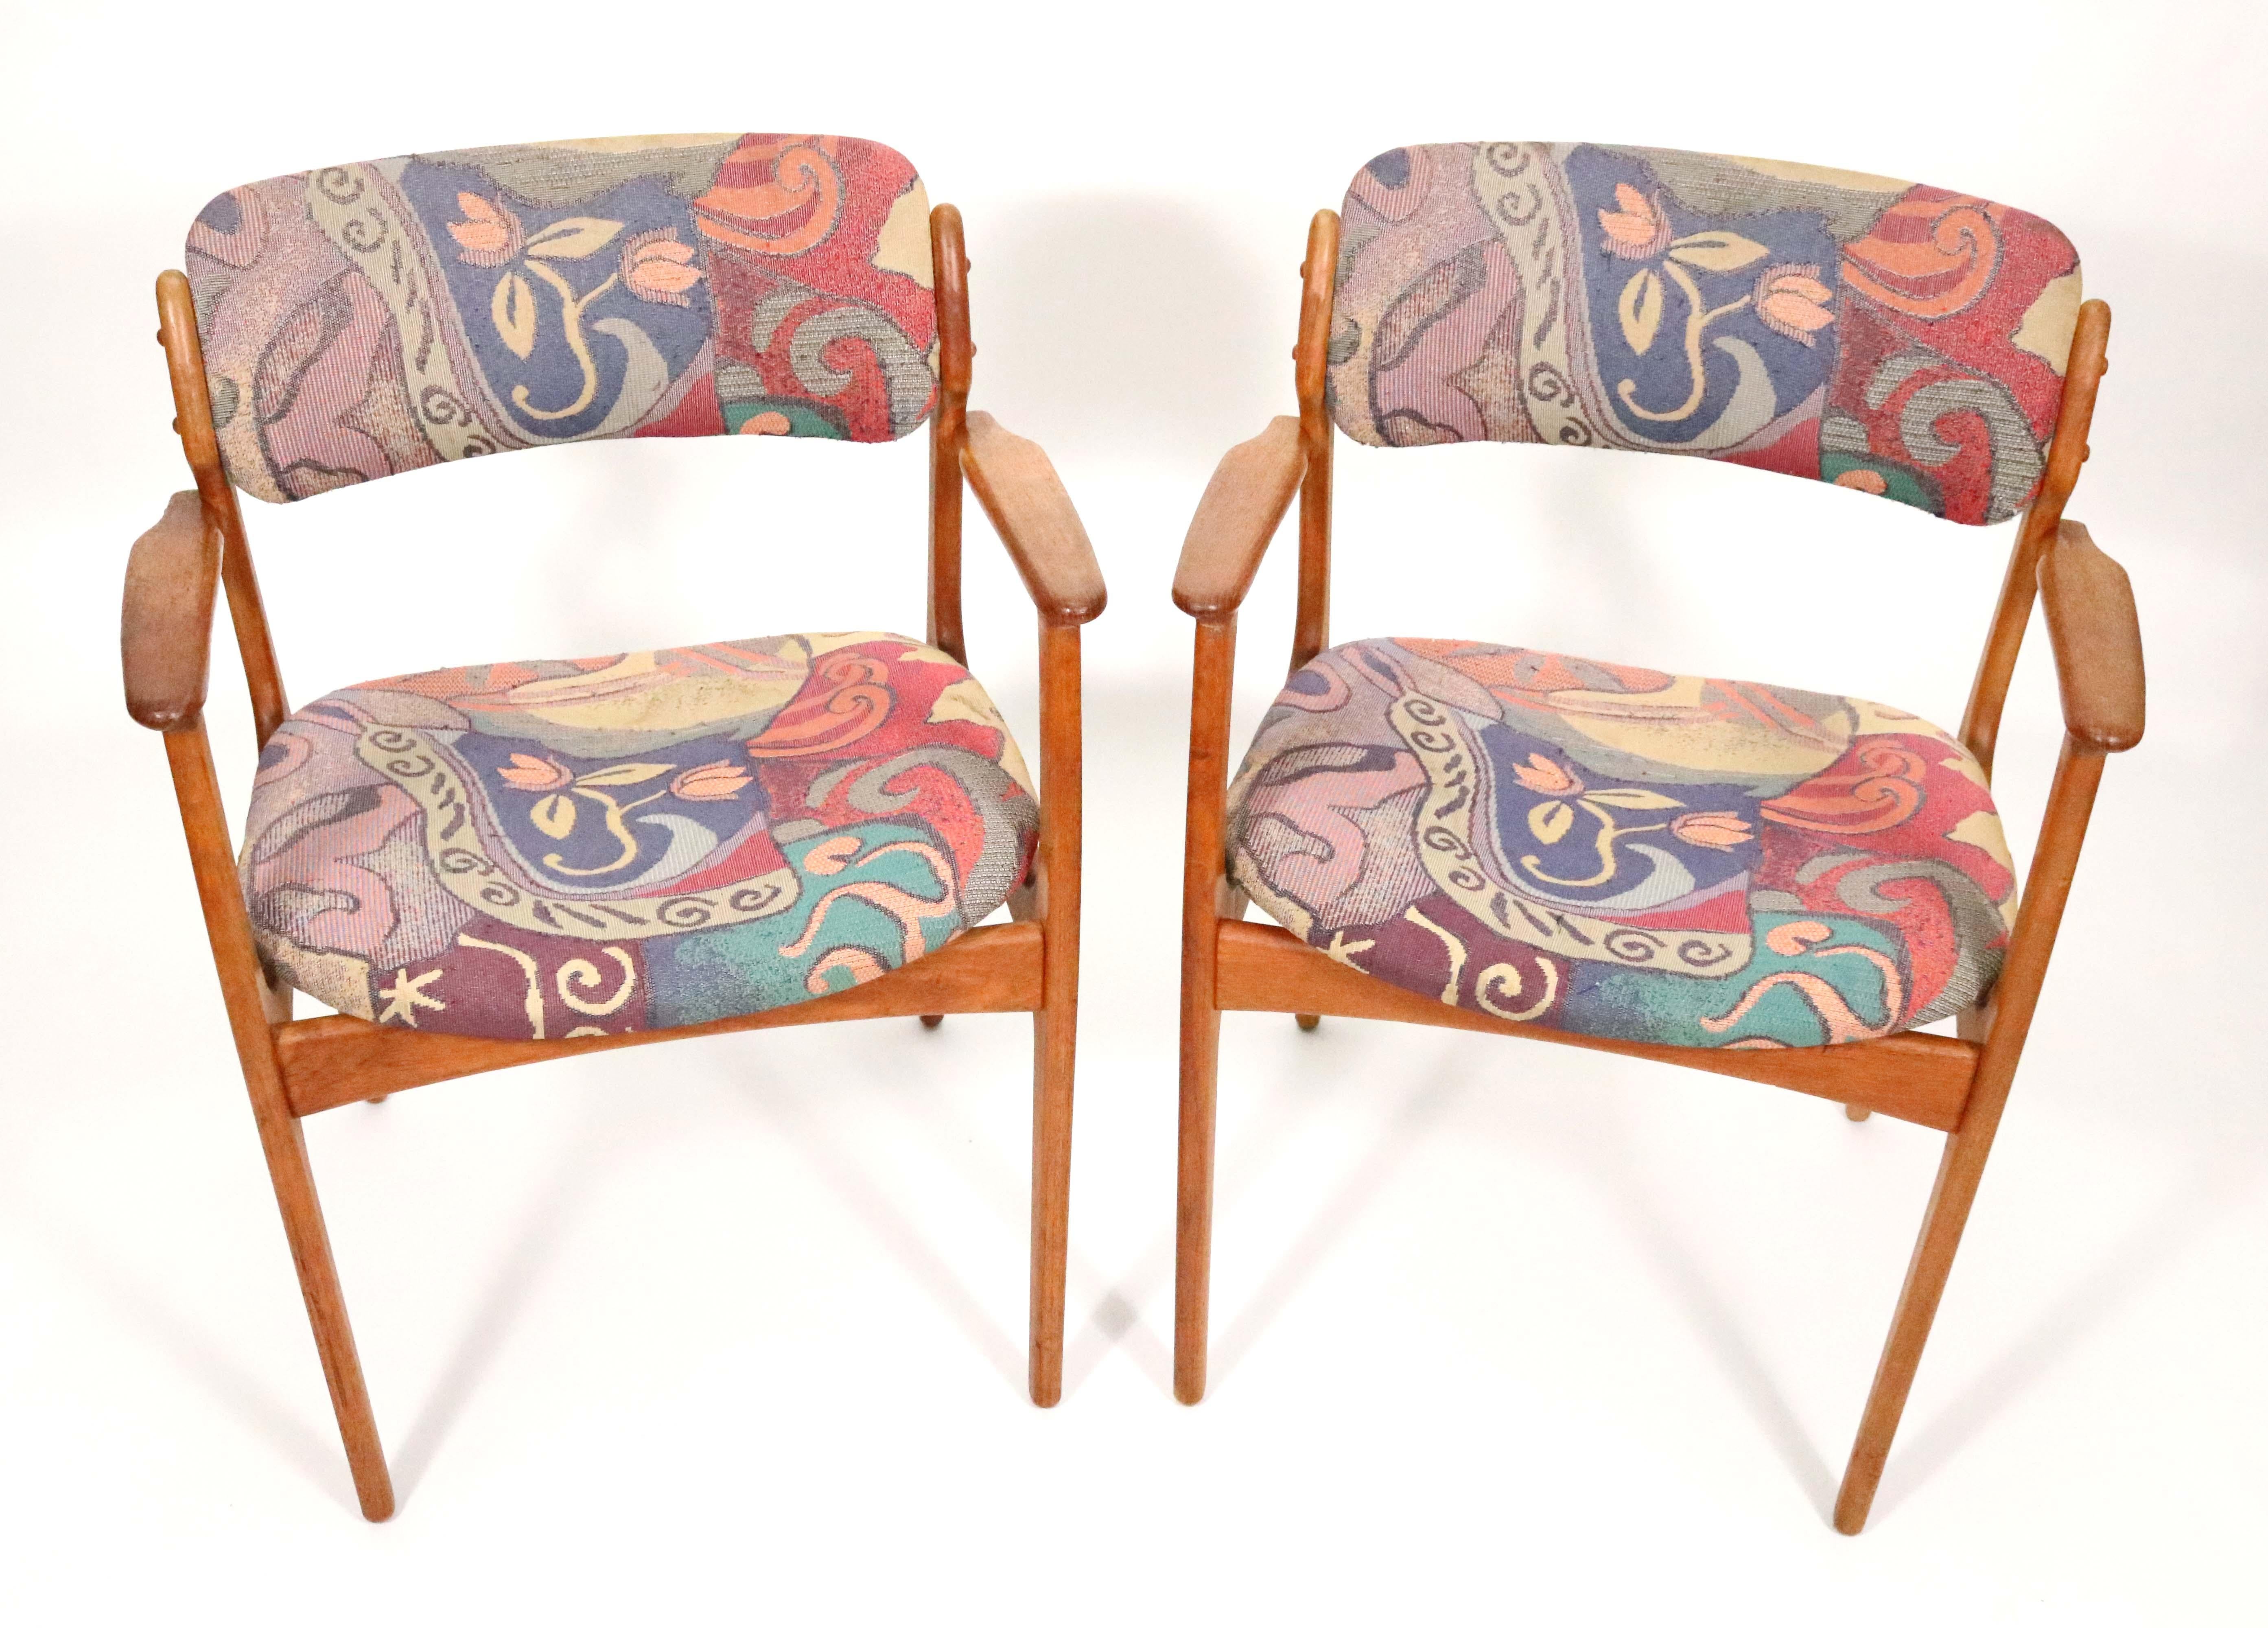 A handsome pair of teak dining armchairs by Erik Buch for Oddense Maskinsnedkeri, Denmark, 1960s.

Simple, solid construction with elegant lines and a comfortable floating seat design. Use them with side chairs for dining, or occasional chairs for